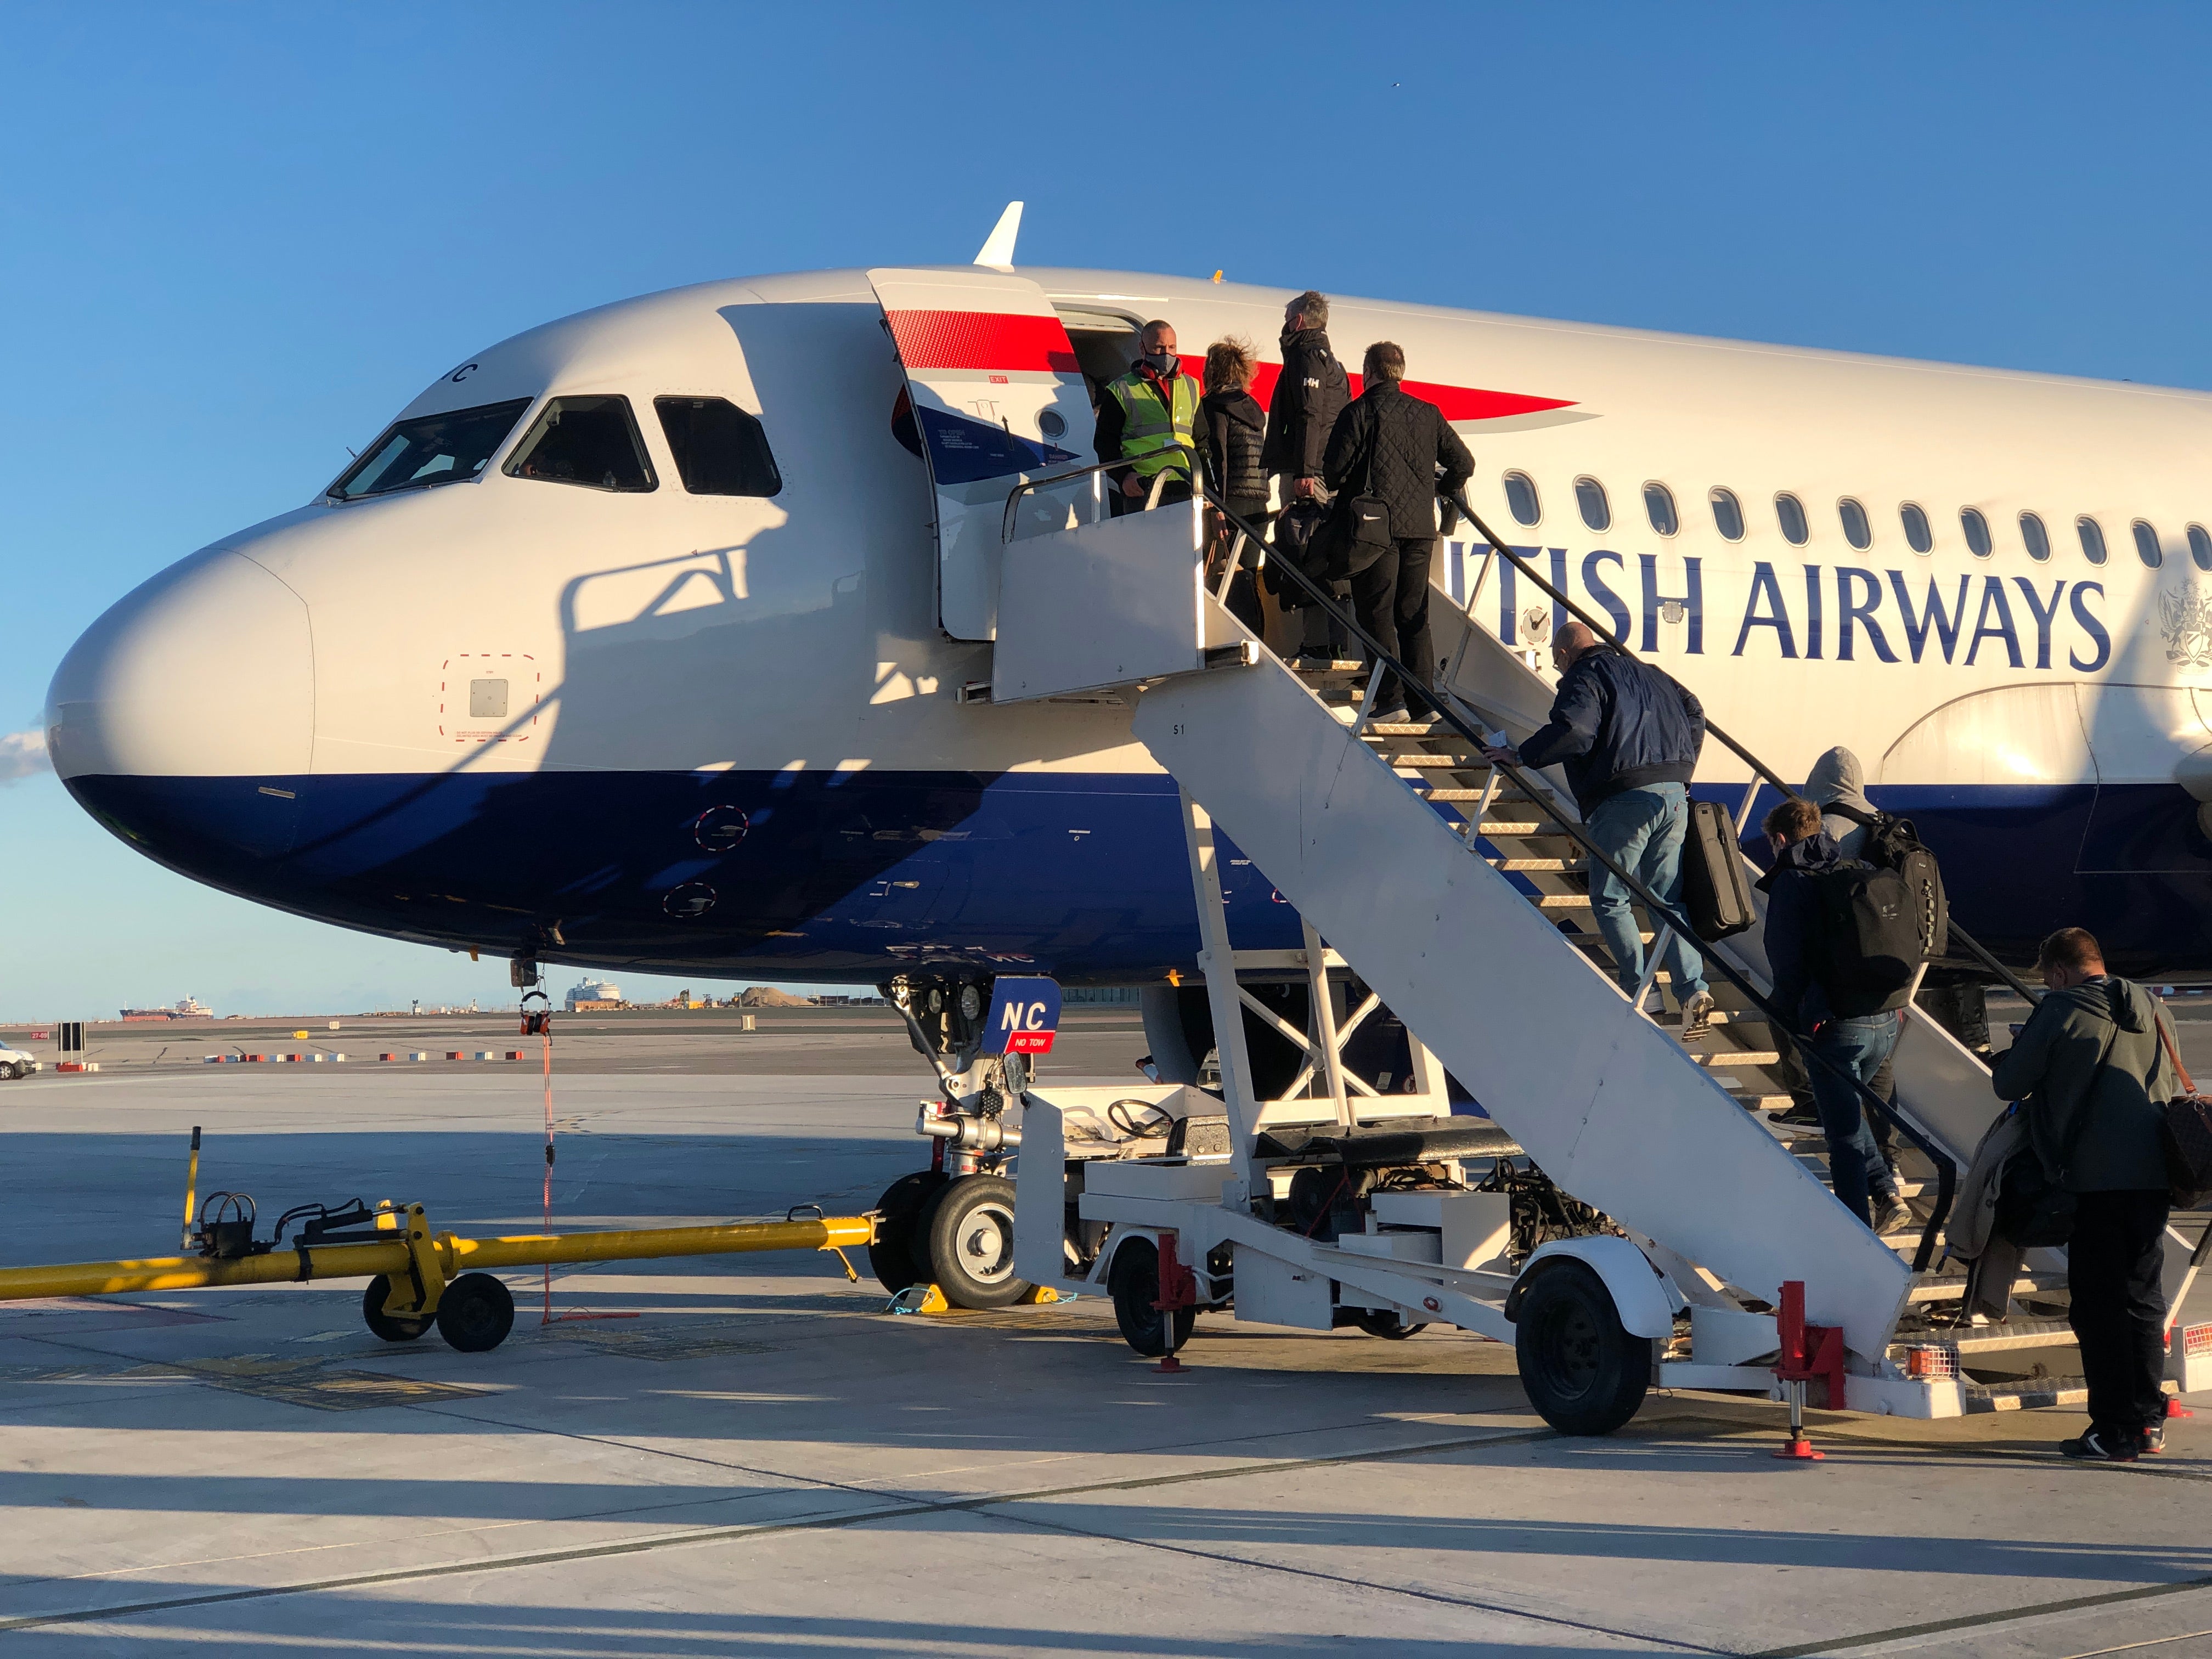 Boarding now: BA has a competitive edge over its no-frills rivals, at least in terms of cabin baggage